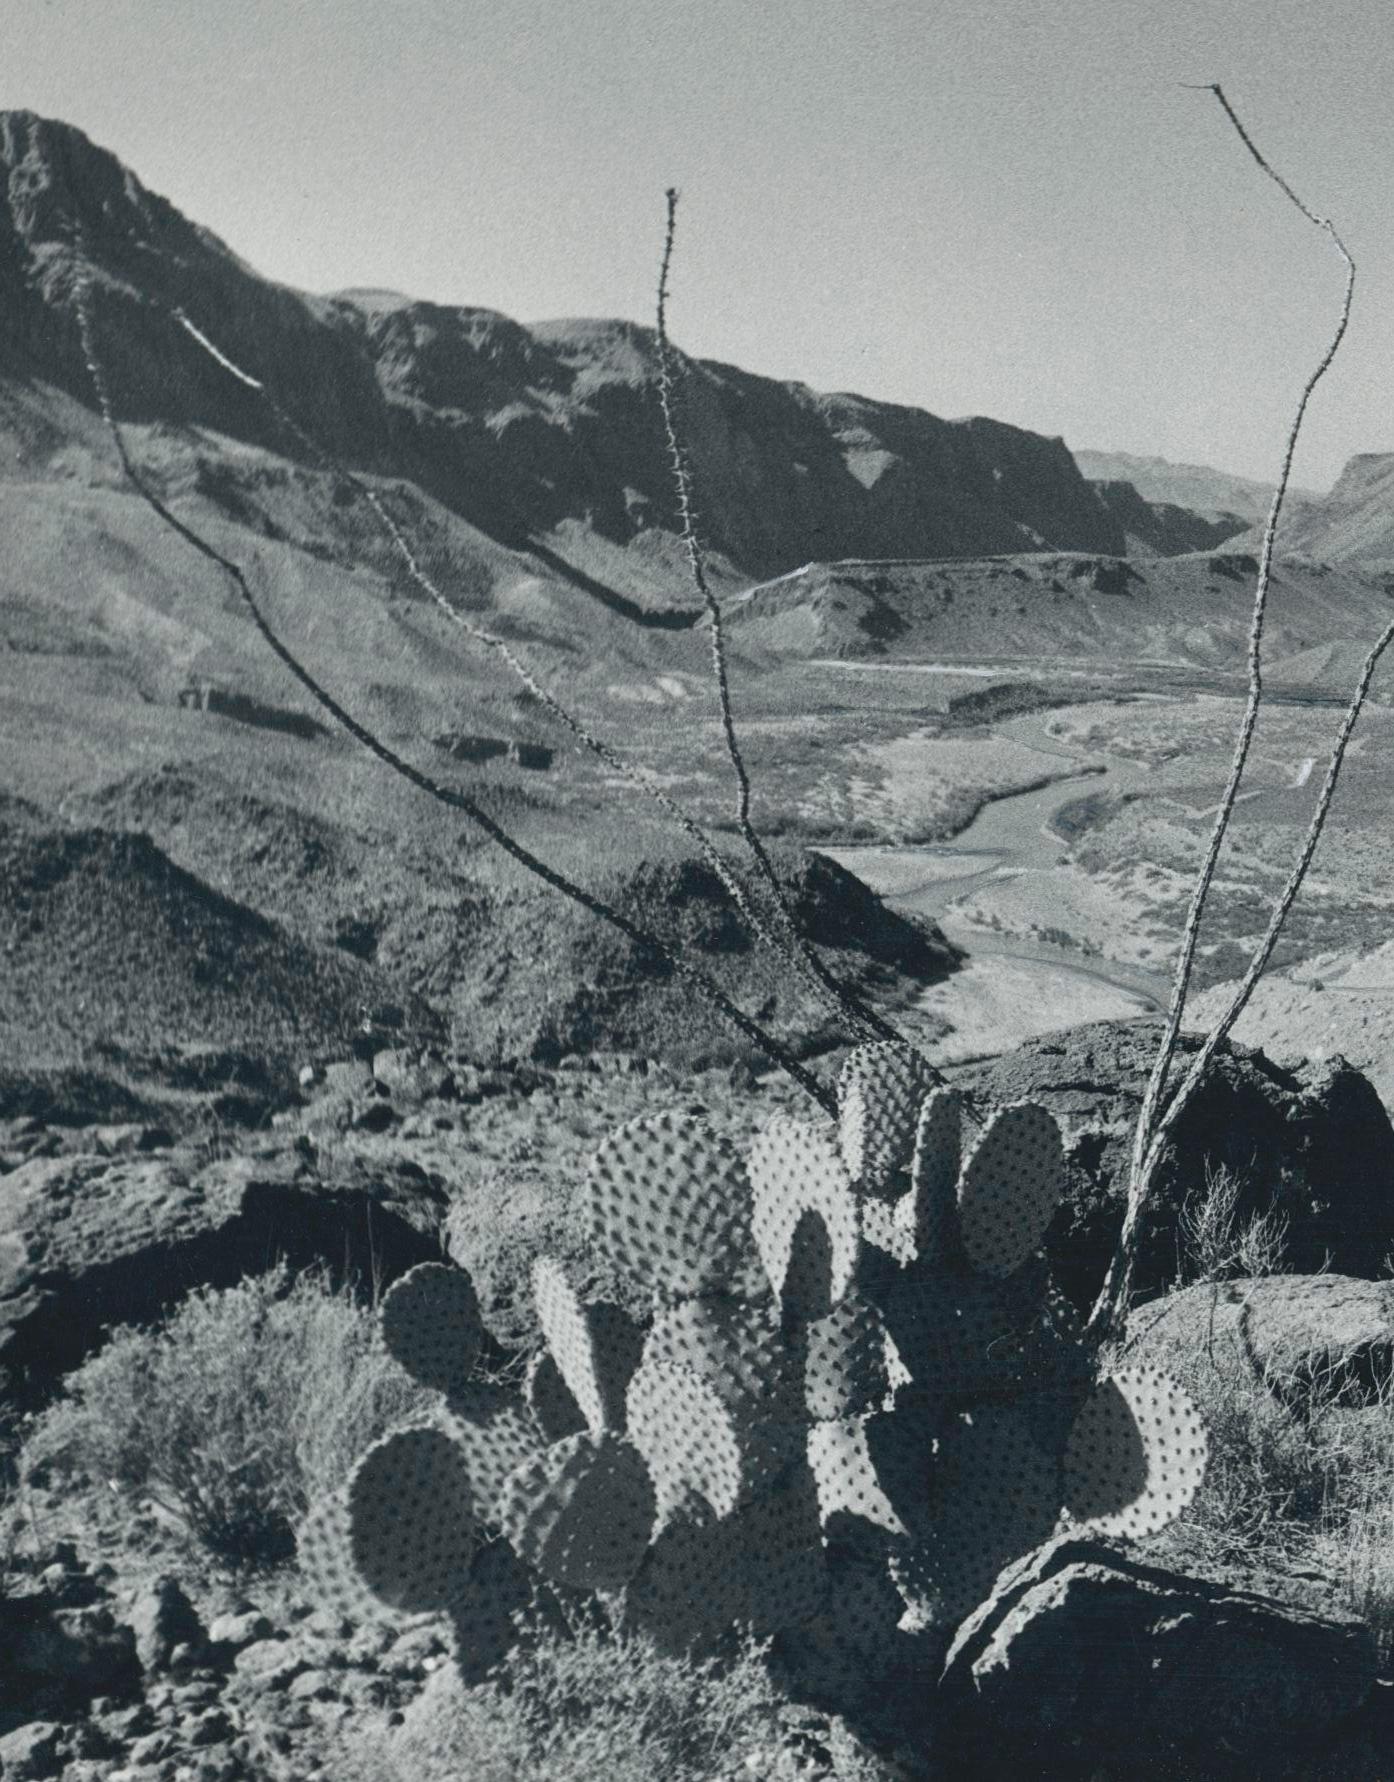 Cacti, Landscape, Rio Grande, Black and White, USA 1960s, 16, 7 x 23, 2 cm - Photograph by Erich Andres